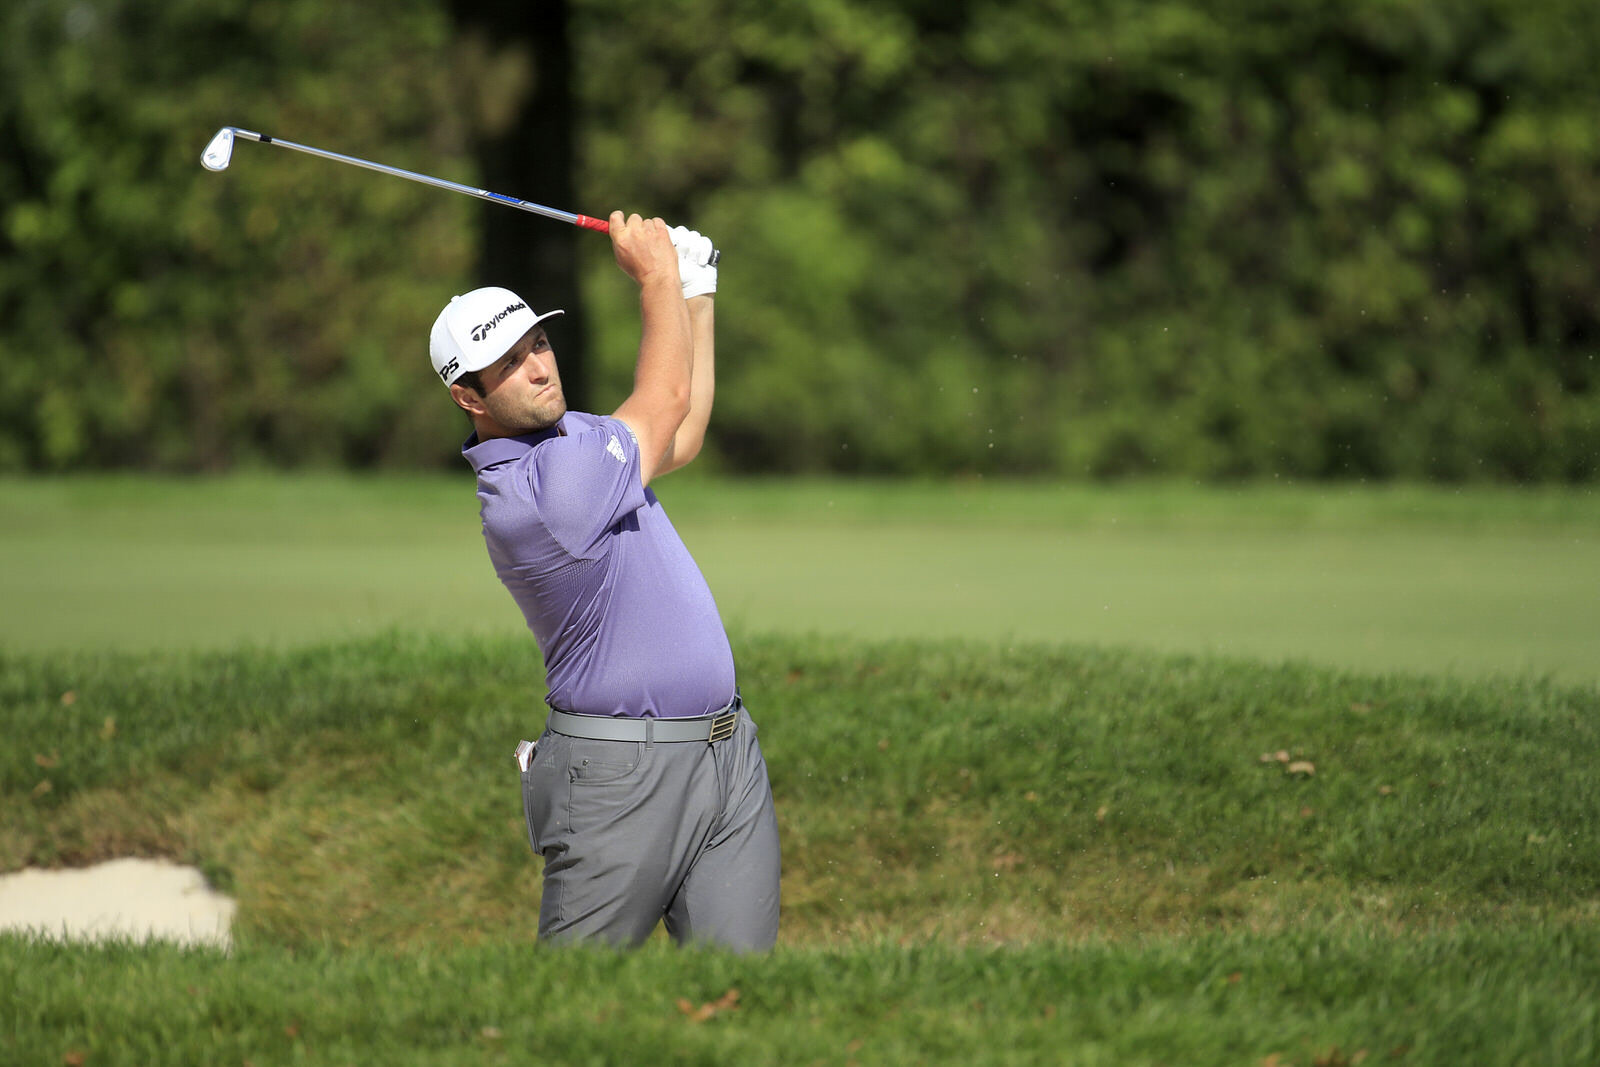  OLYMPIA FIELDS, ILLINOIS - AUGUST 29: Jon Rahm of Spain plays a second shot on the second hole during the third round of the BMW Championship on the North Course at Olympia Fields Country Club on August 29, 2020 in Olympia Fields, Illinois. (Photo b